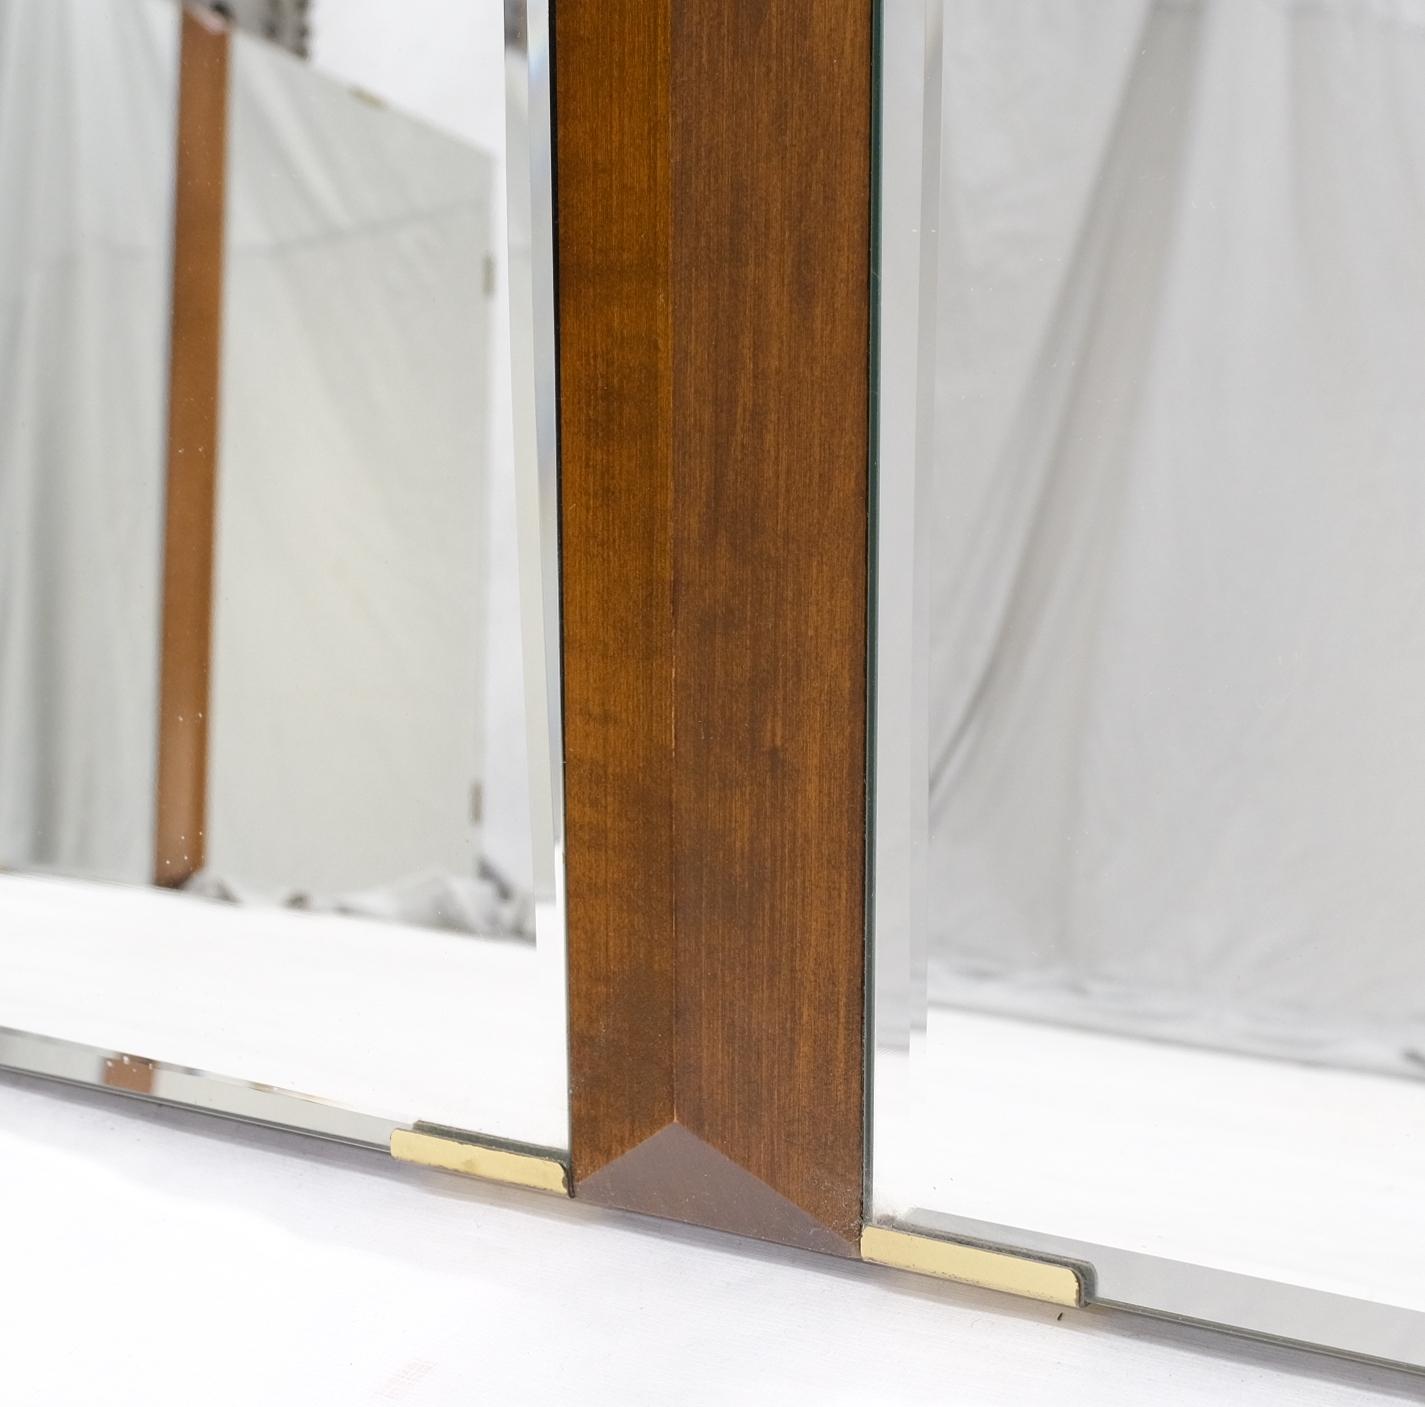 Pair of Mid Century Modern Tripple Beveled Mirrors w/ Walnut Accents For Sale 6